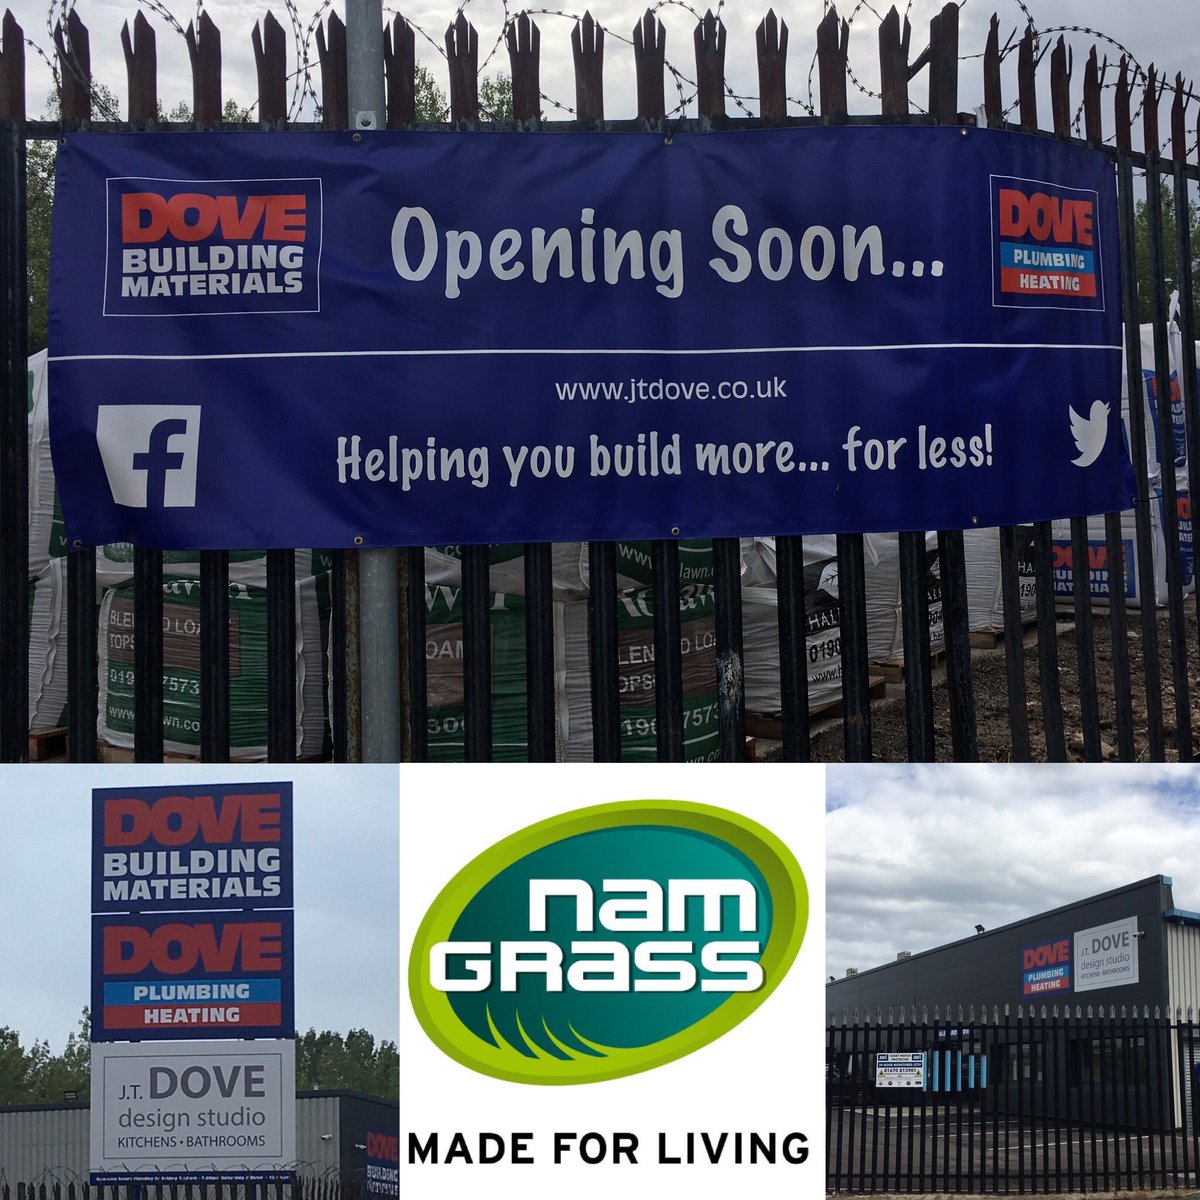 Great visit to set up @Namgrass for a new @jt_dove branch in #southshields #openingsoon #madeforliving #newbranch #artificialgrass #landscaping #gardening